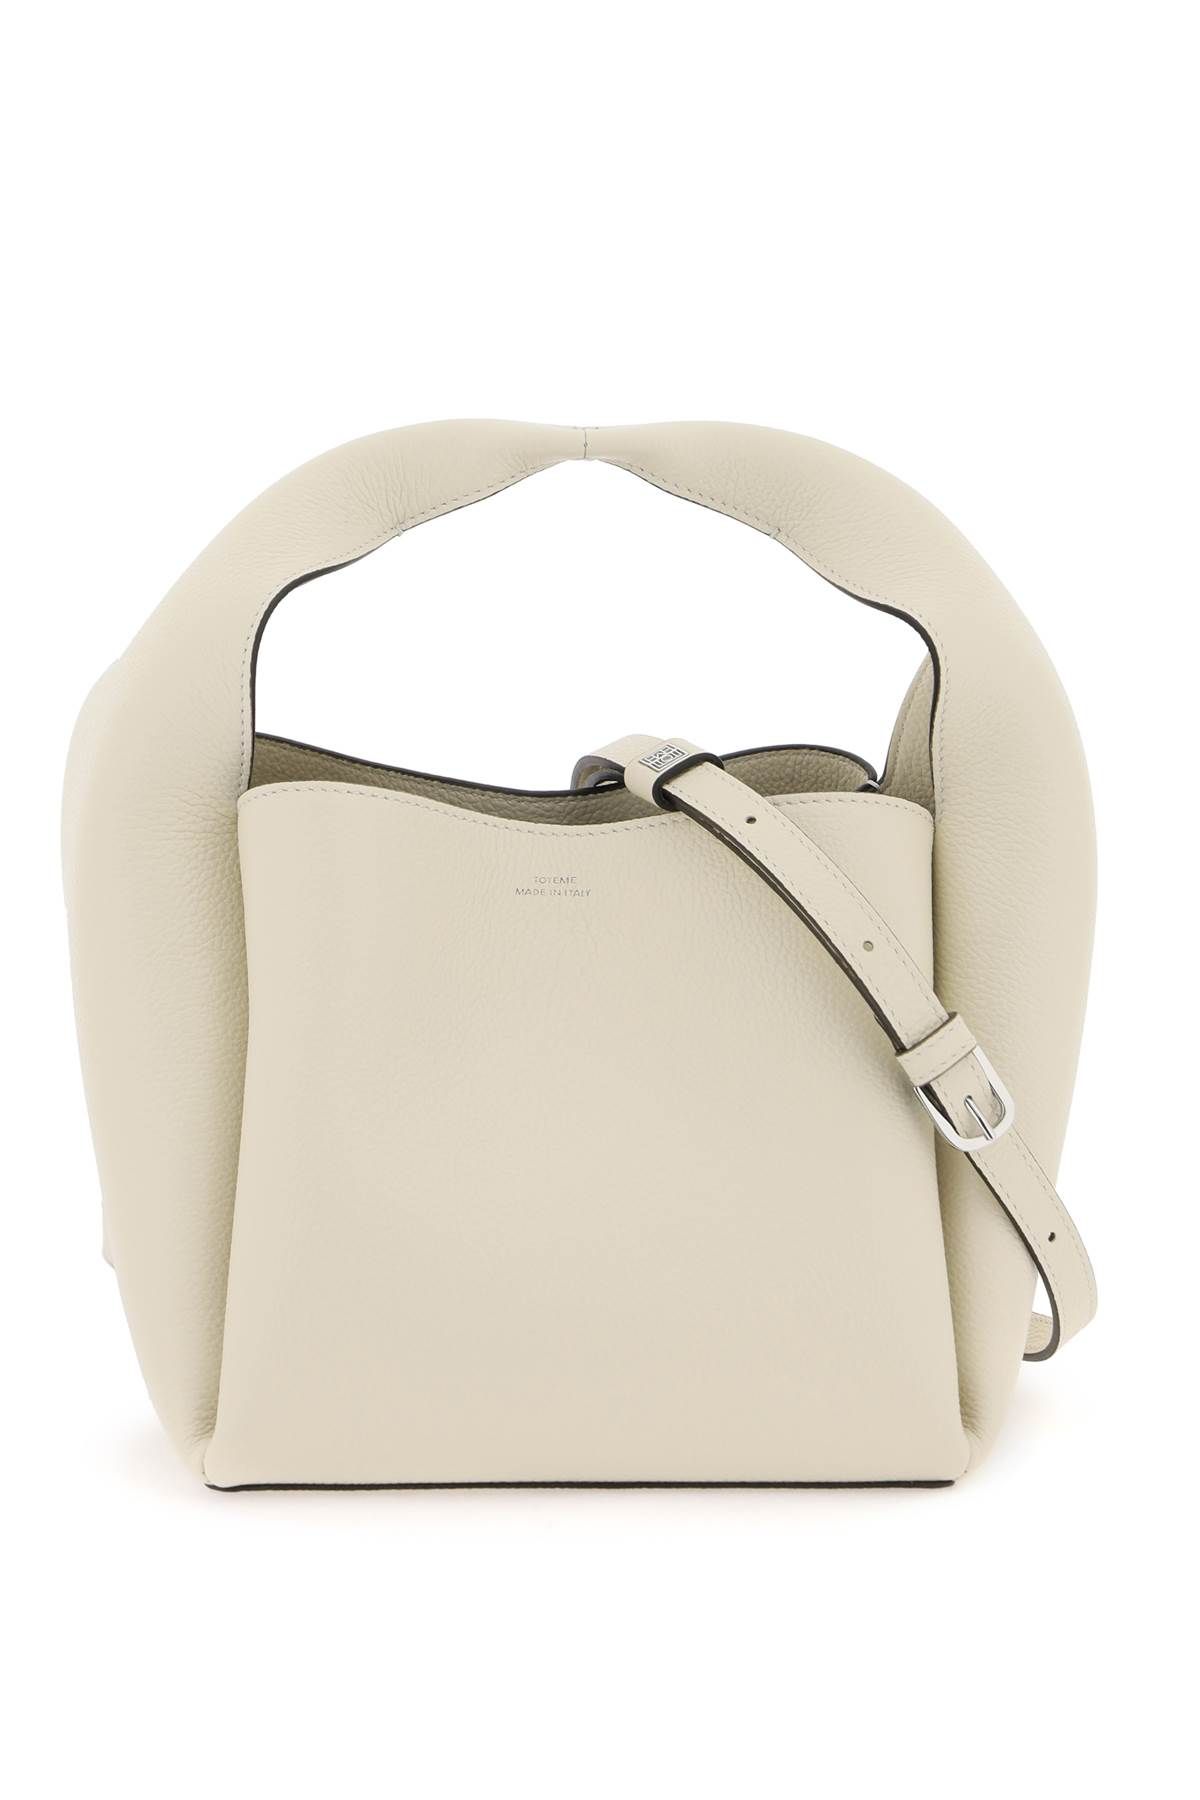 Toteme TOTEME hammered leather bucket bag